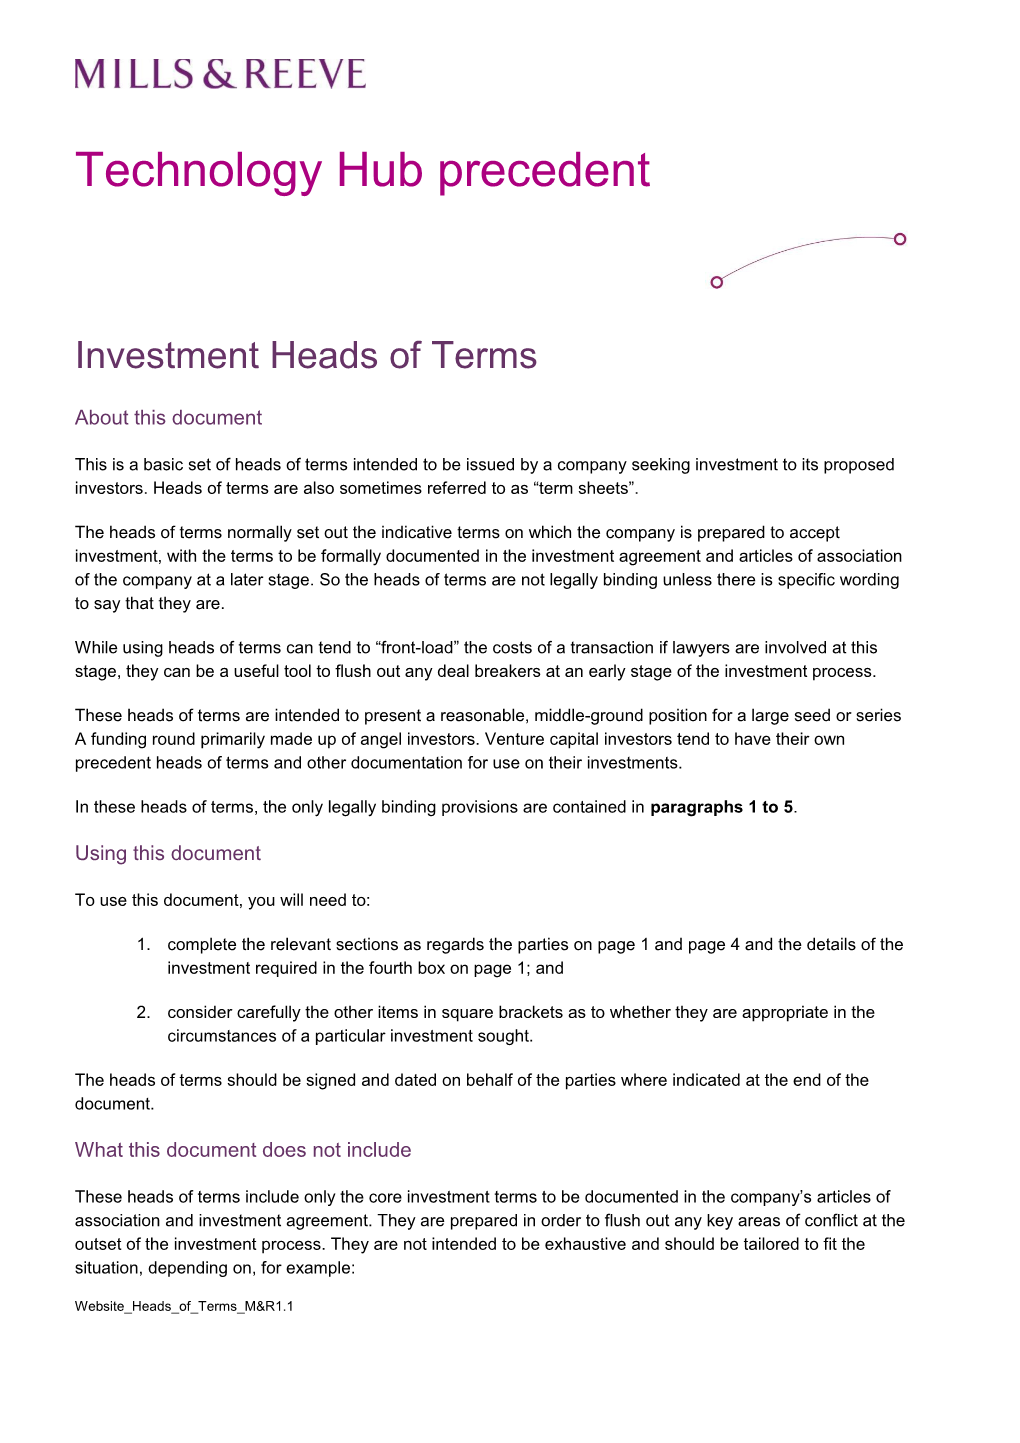 Investment Heads of Terms